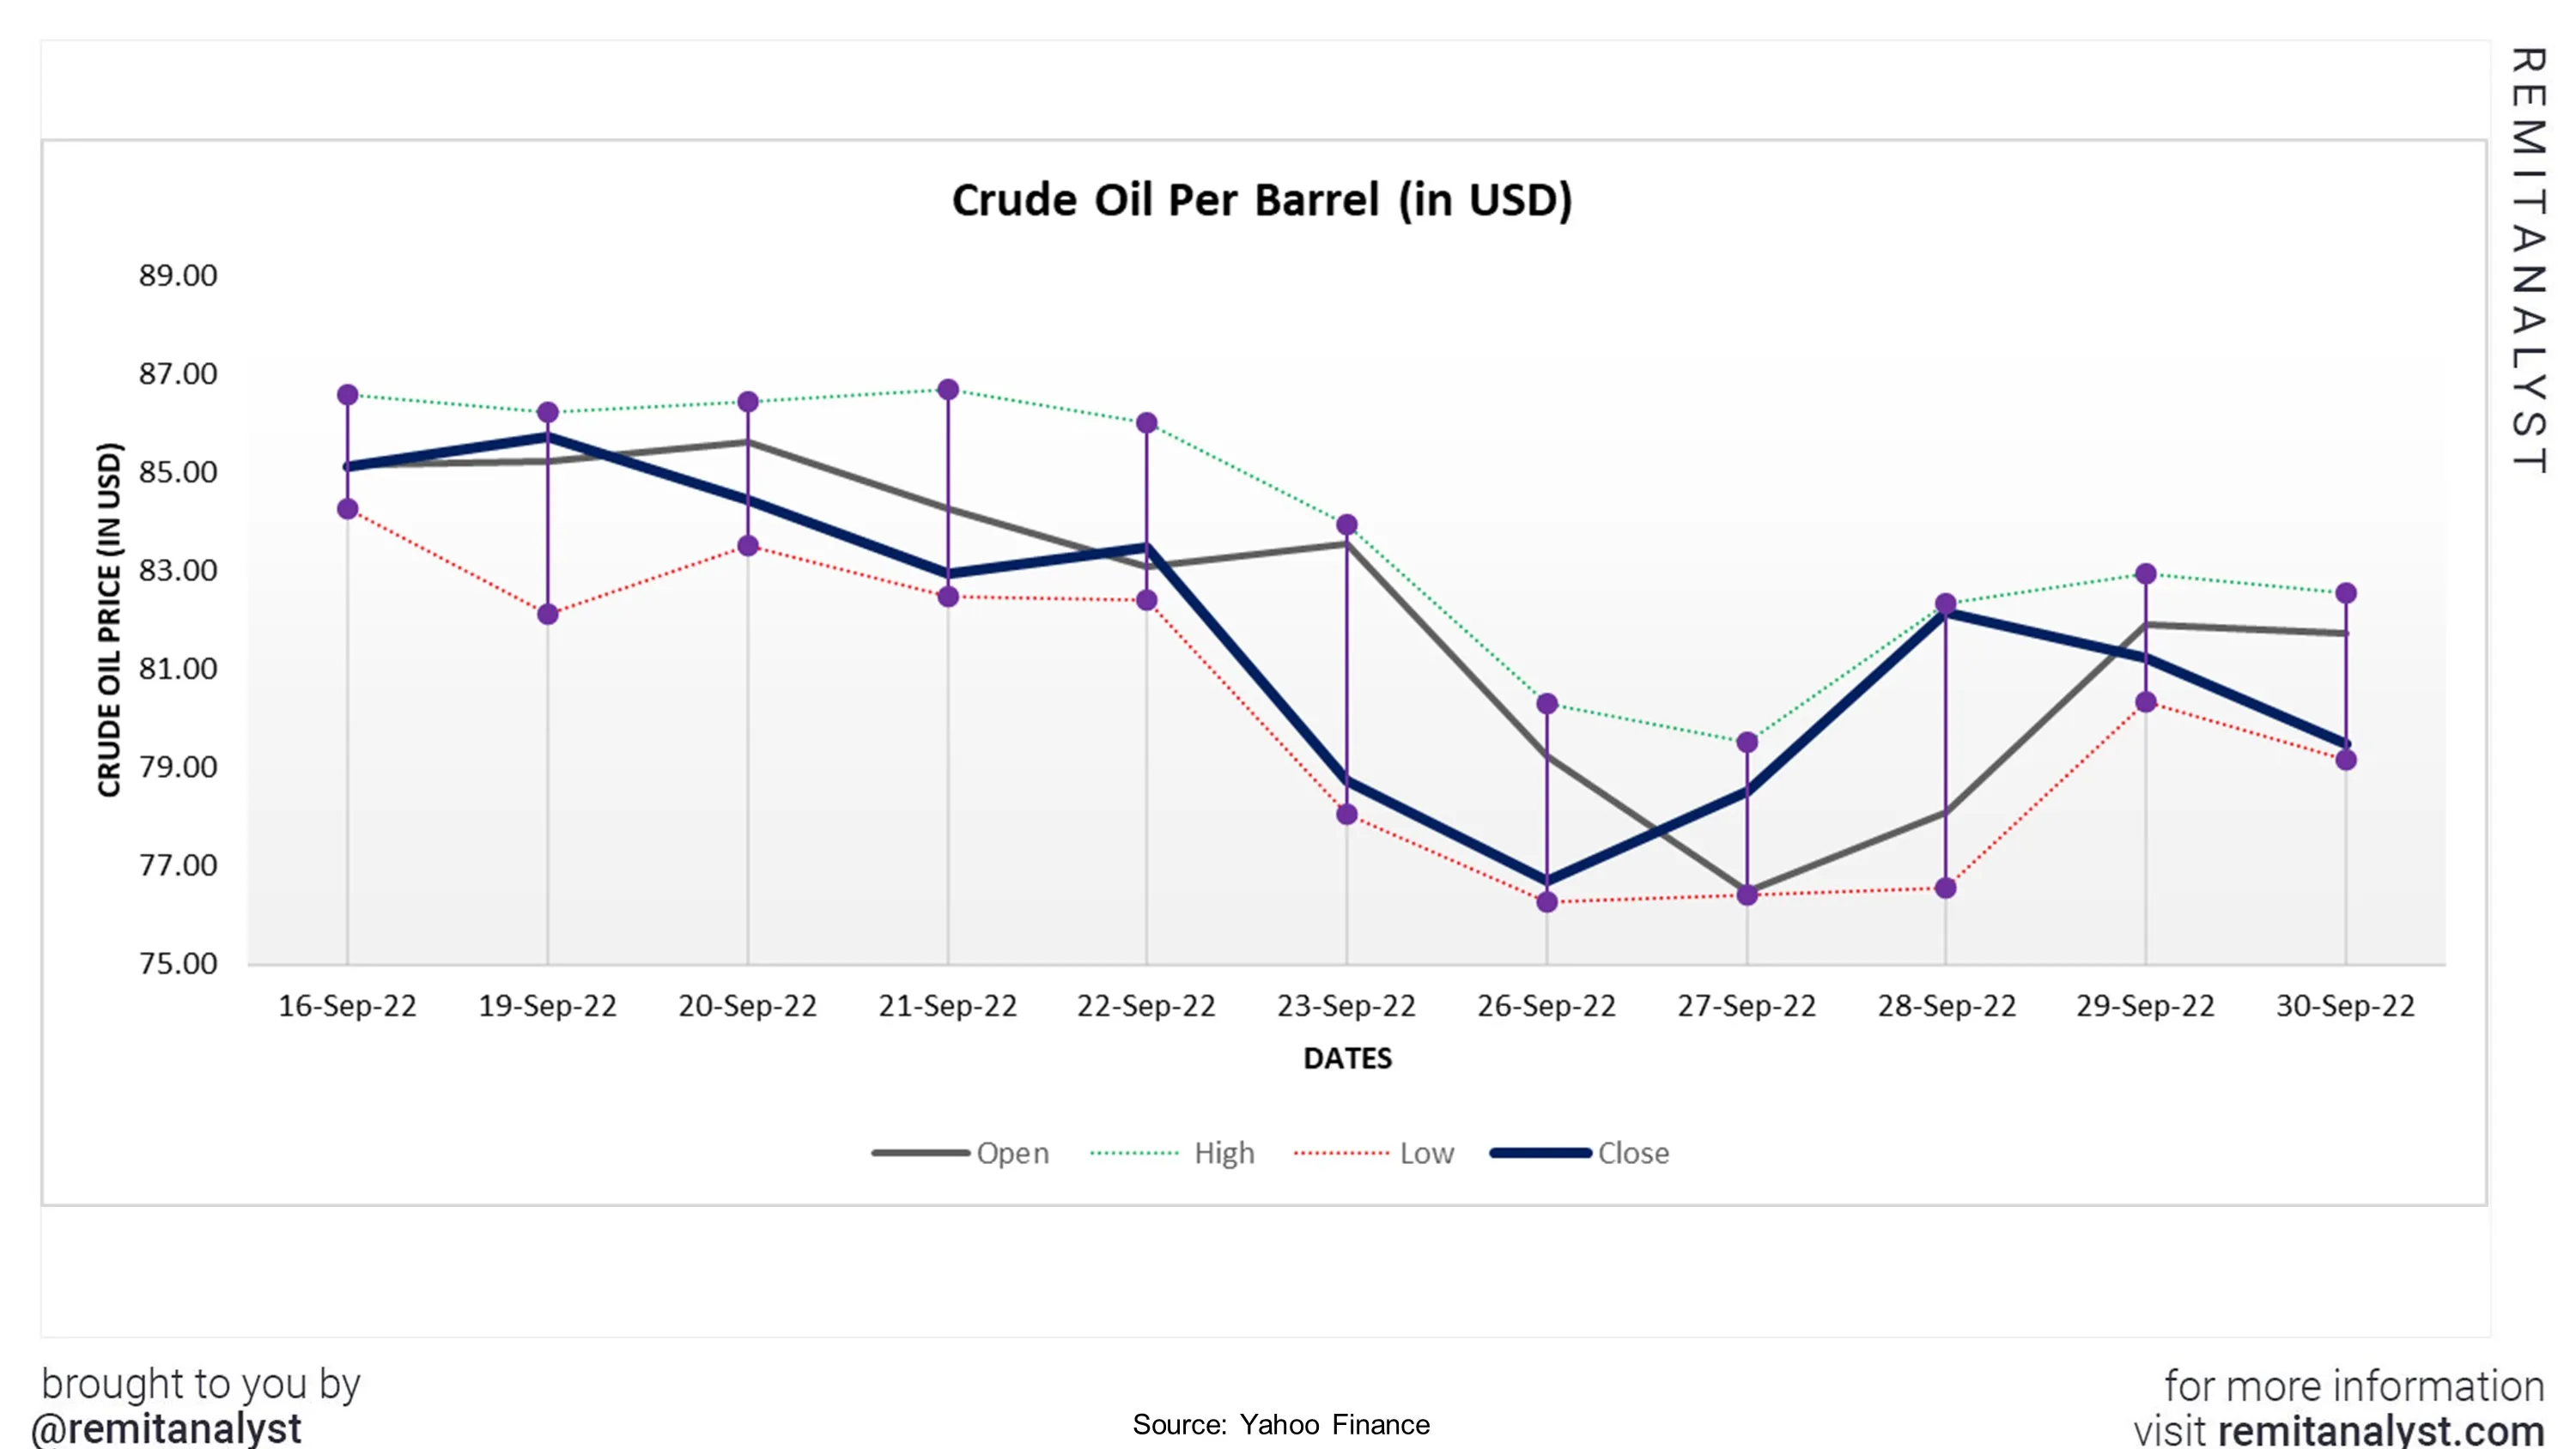 Crude-Oil-Prices-from-09-16-2022-to-09-30-2022